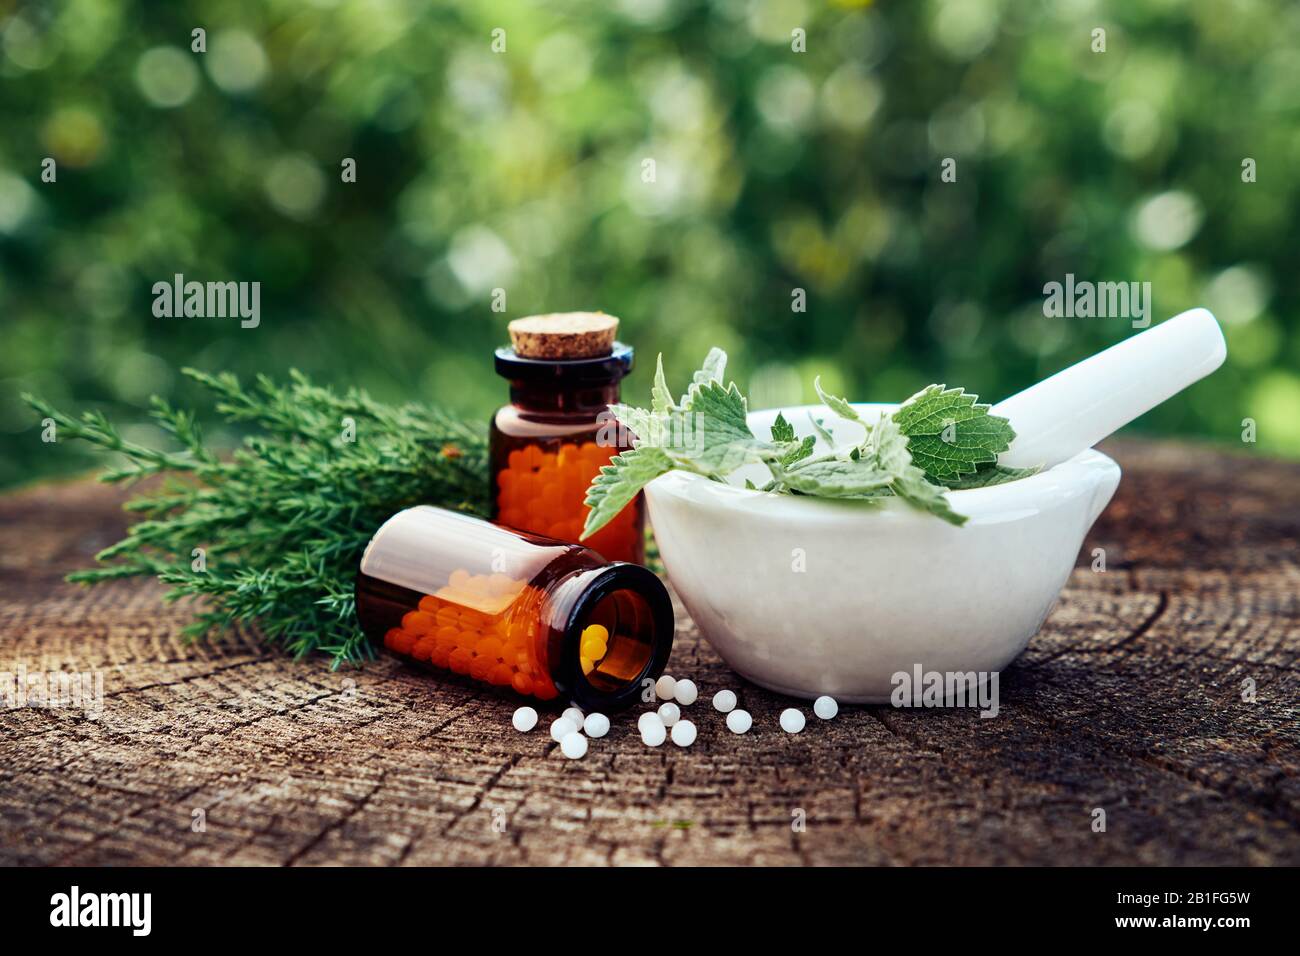 Bottle of homeopathic globules, mortar of green nettle and mint leaves, juniper twigs. Homeopathy medicine remedies. Selective focus, toned image. Stock Photo